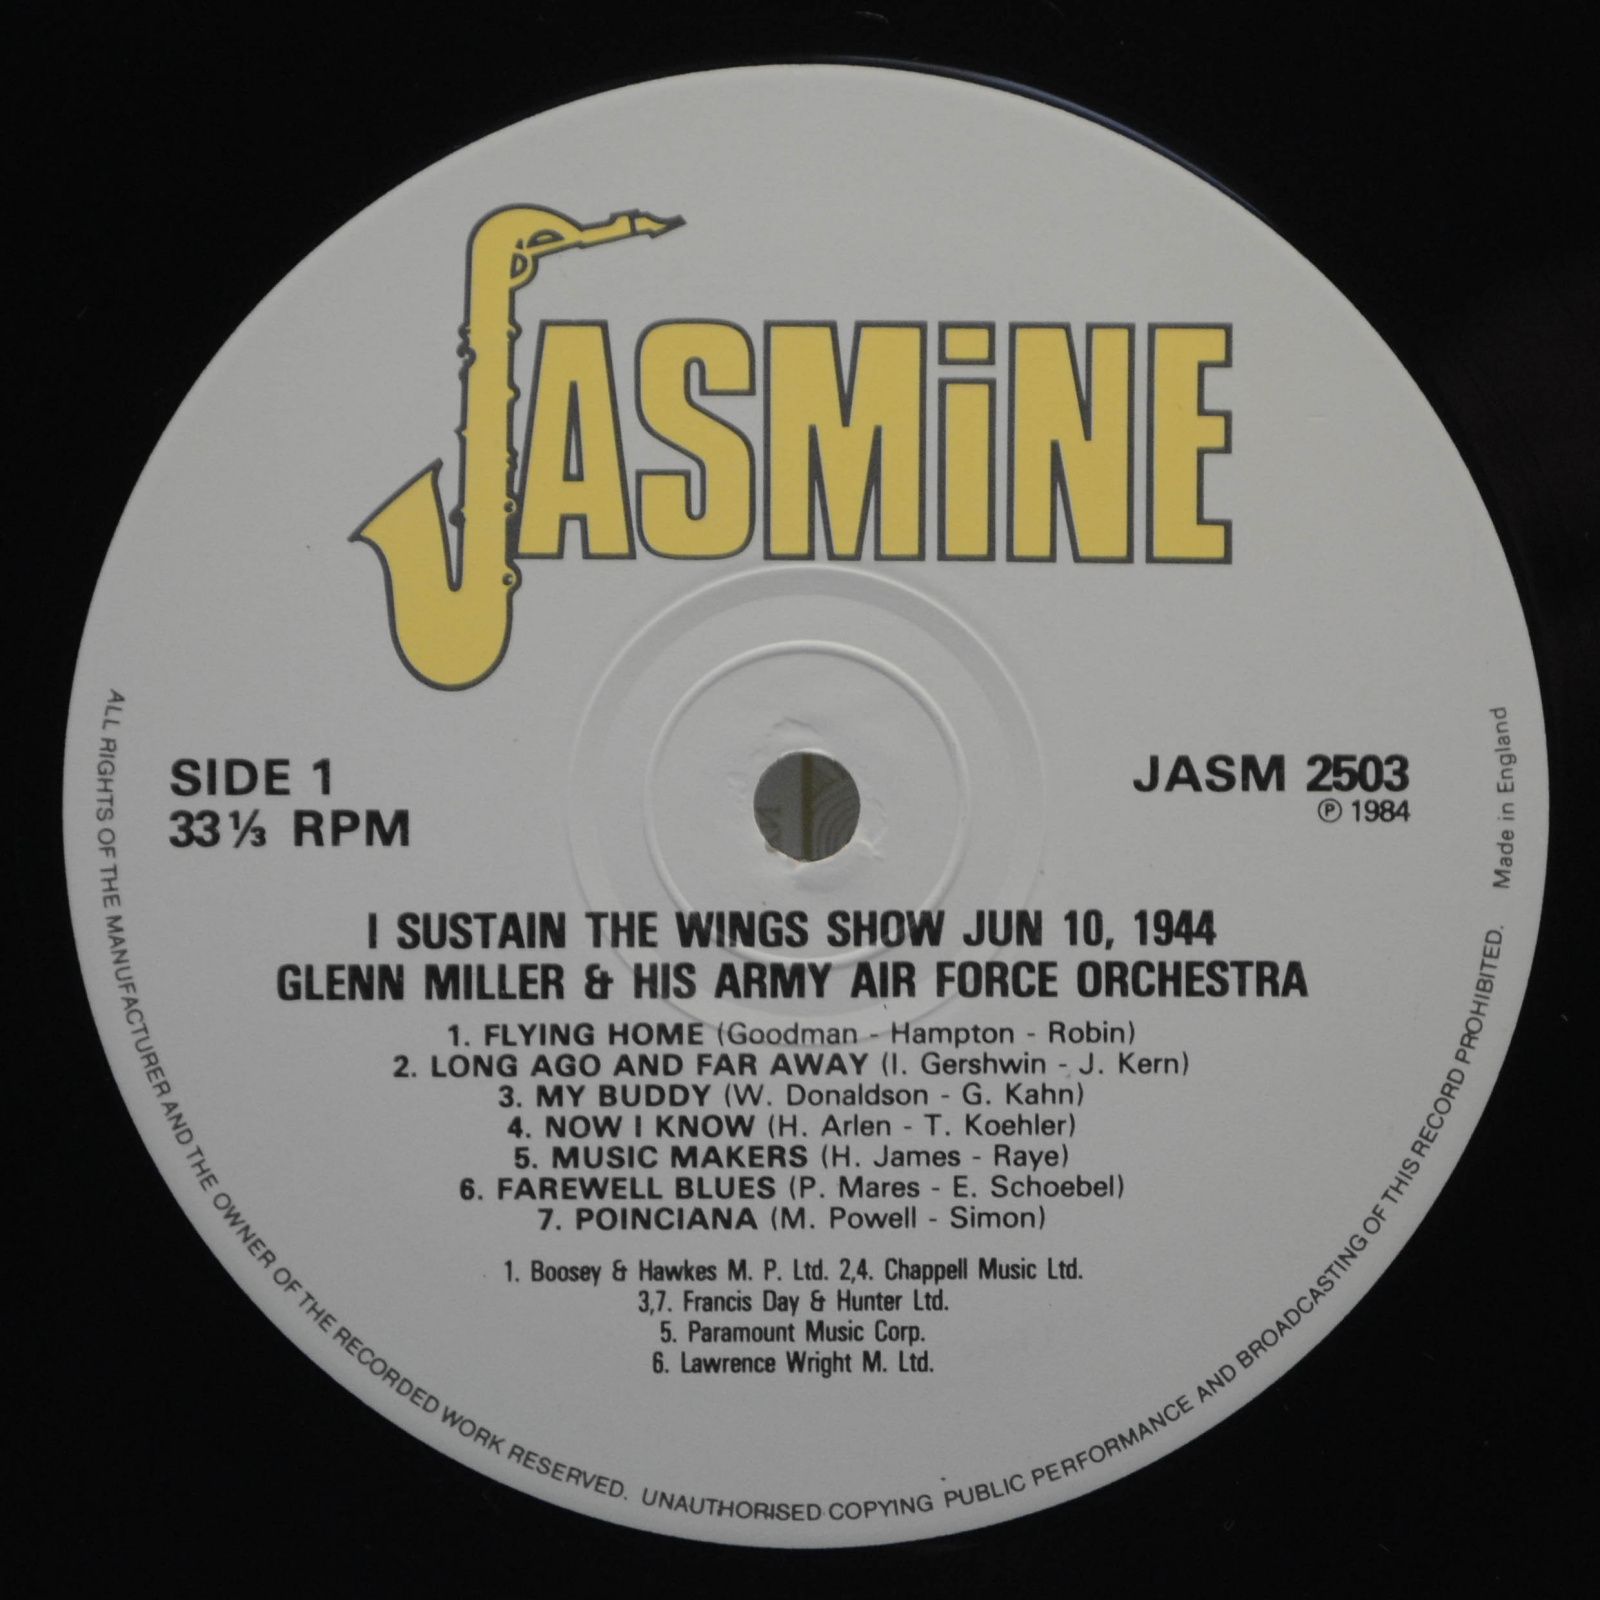 Glenn Miller And His Army Air Force Orchestra — I Sustain The Wings Shows - June 10-1944 April 15-1944 (UK), 1984